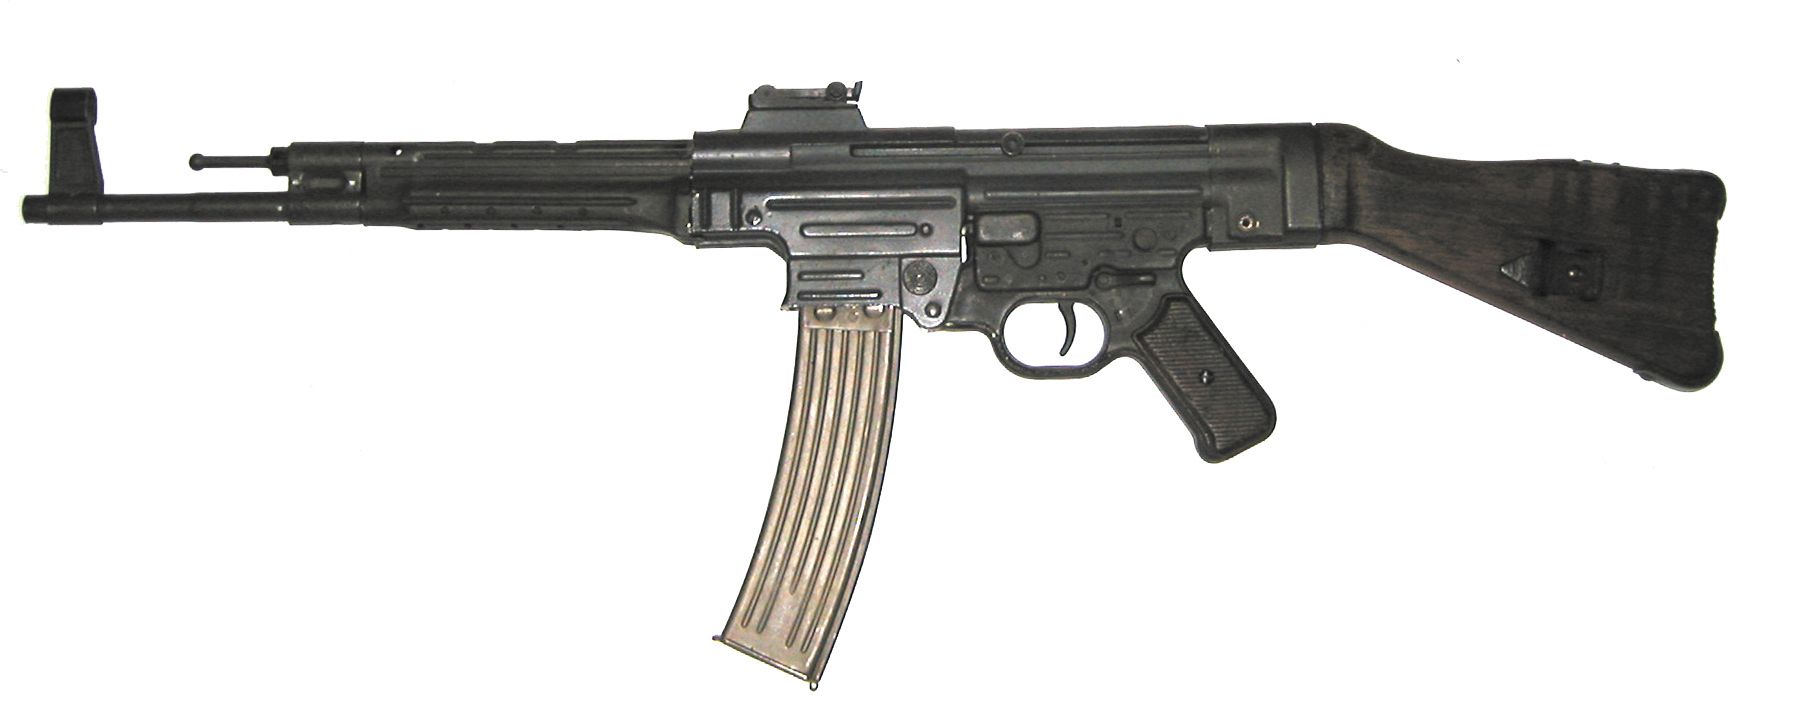 Nonfiring StG-44m, also known as the MP-44, featuring a solid “dummy” receiver.